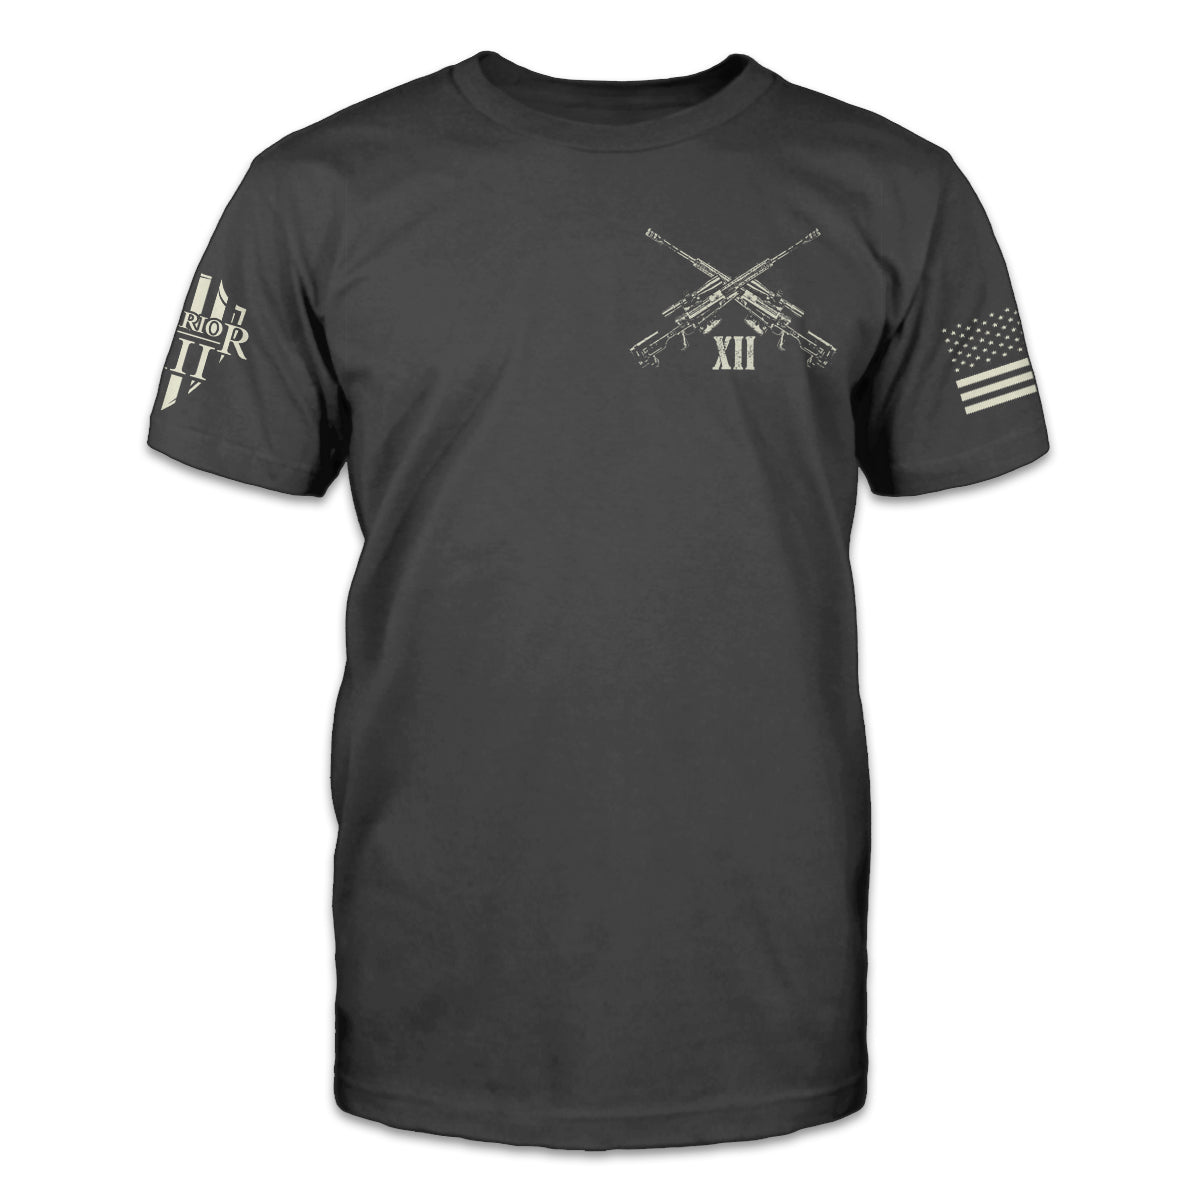 A grey t-shirt with two guns crossed over printed on the front of the shirt.